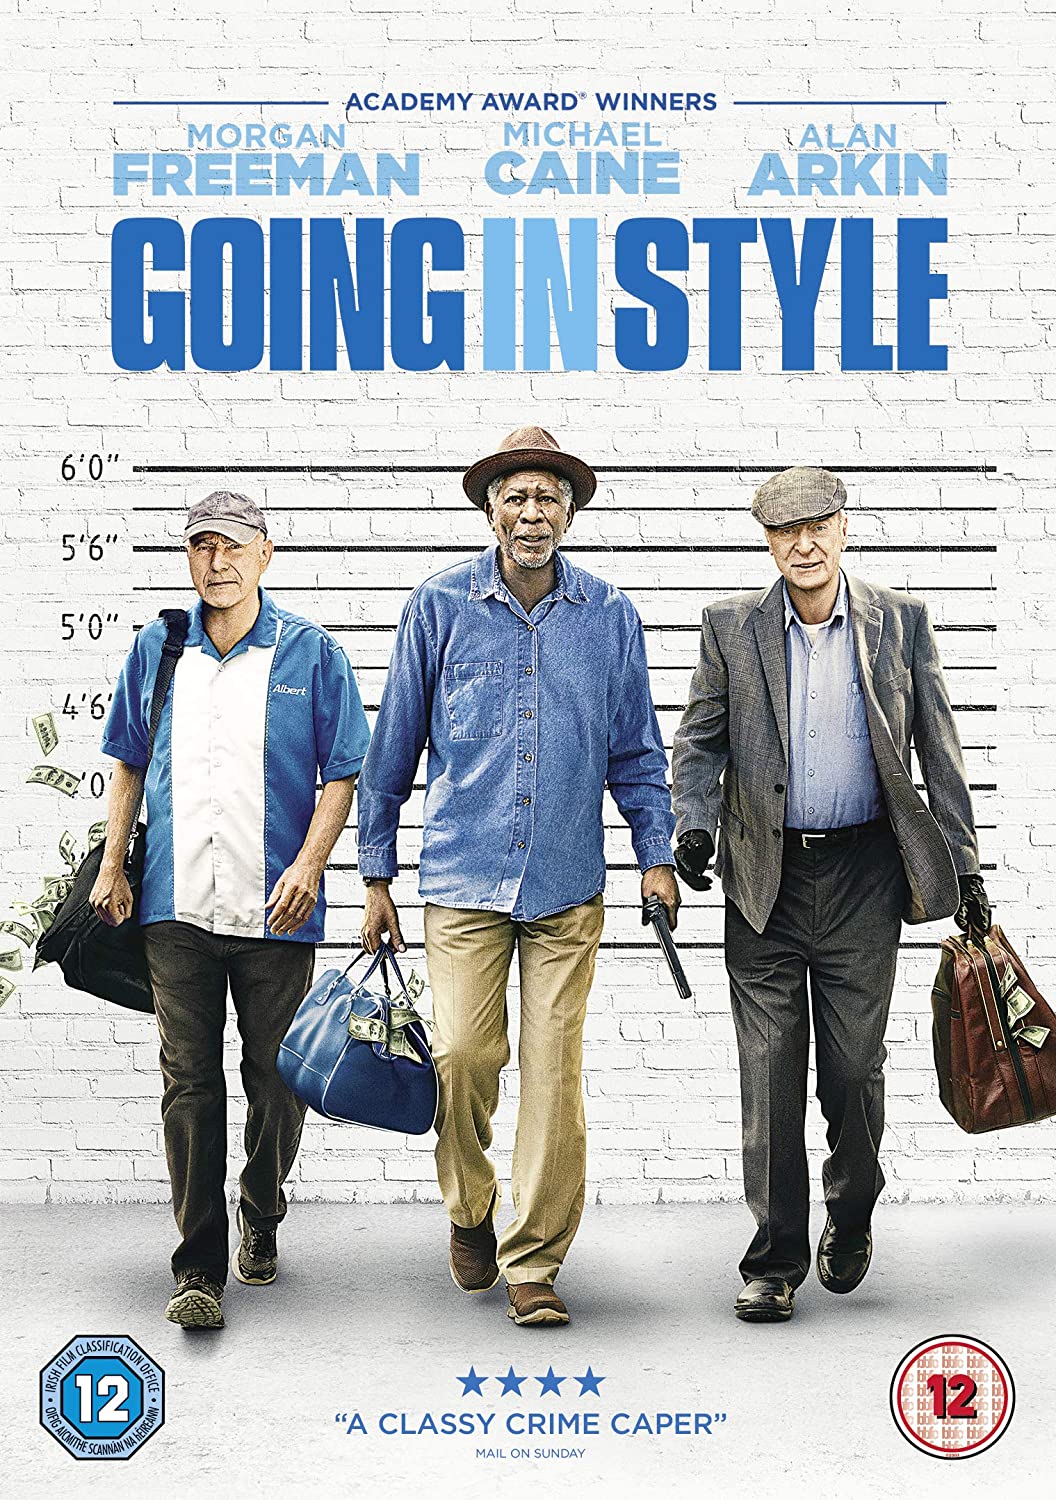 Going in Style -  Crime/Comedy [DVD]